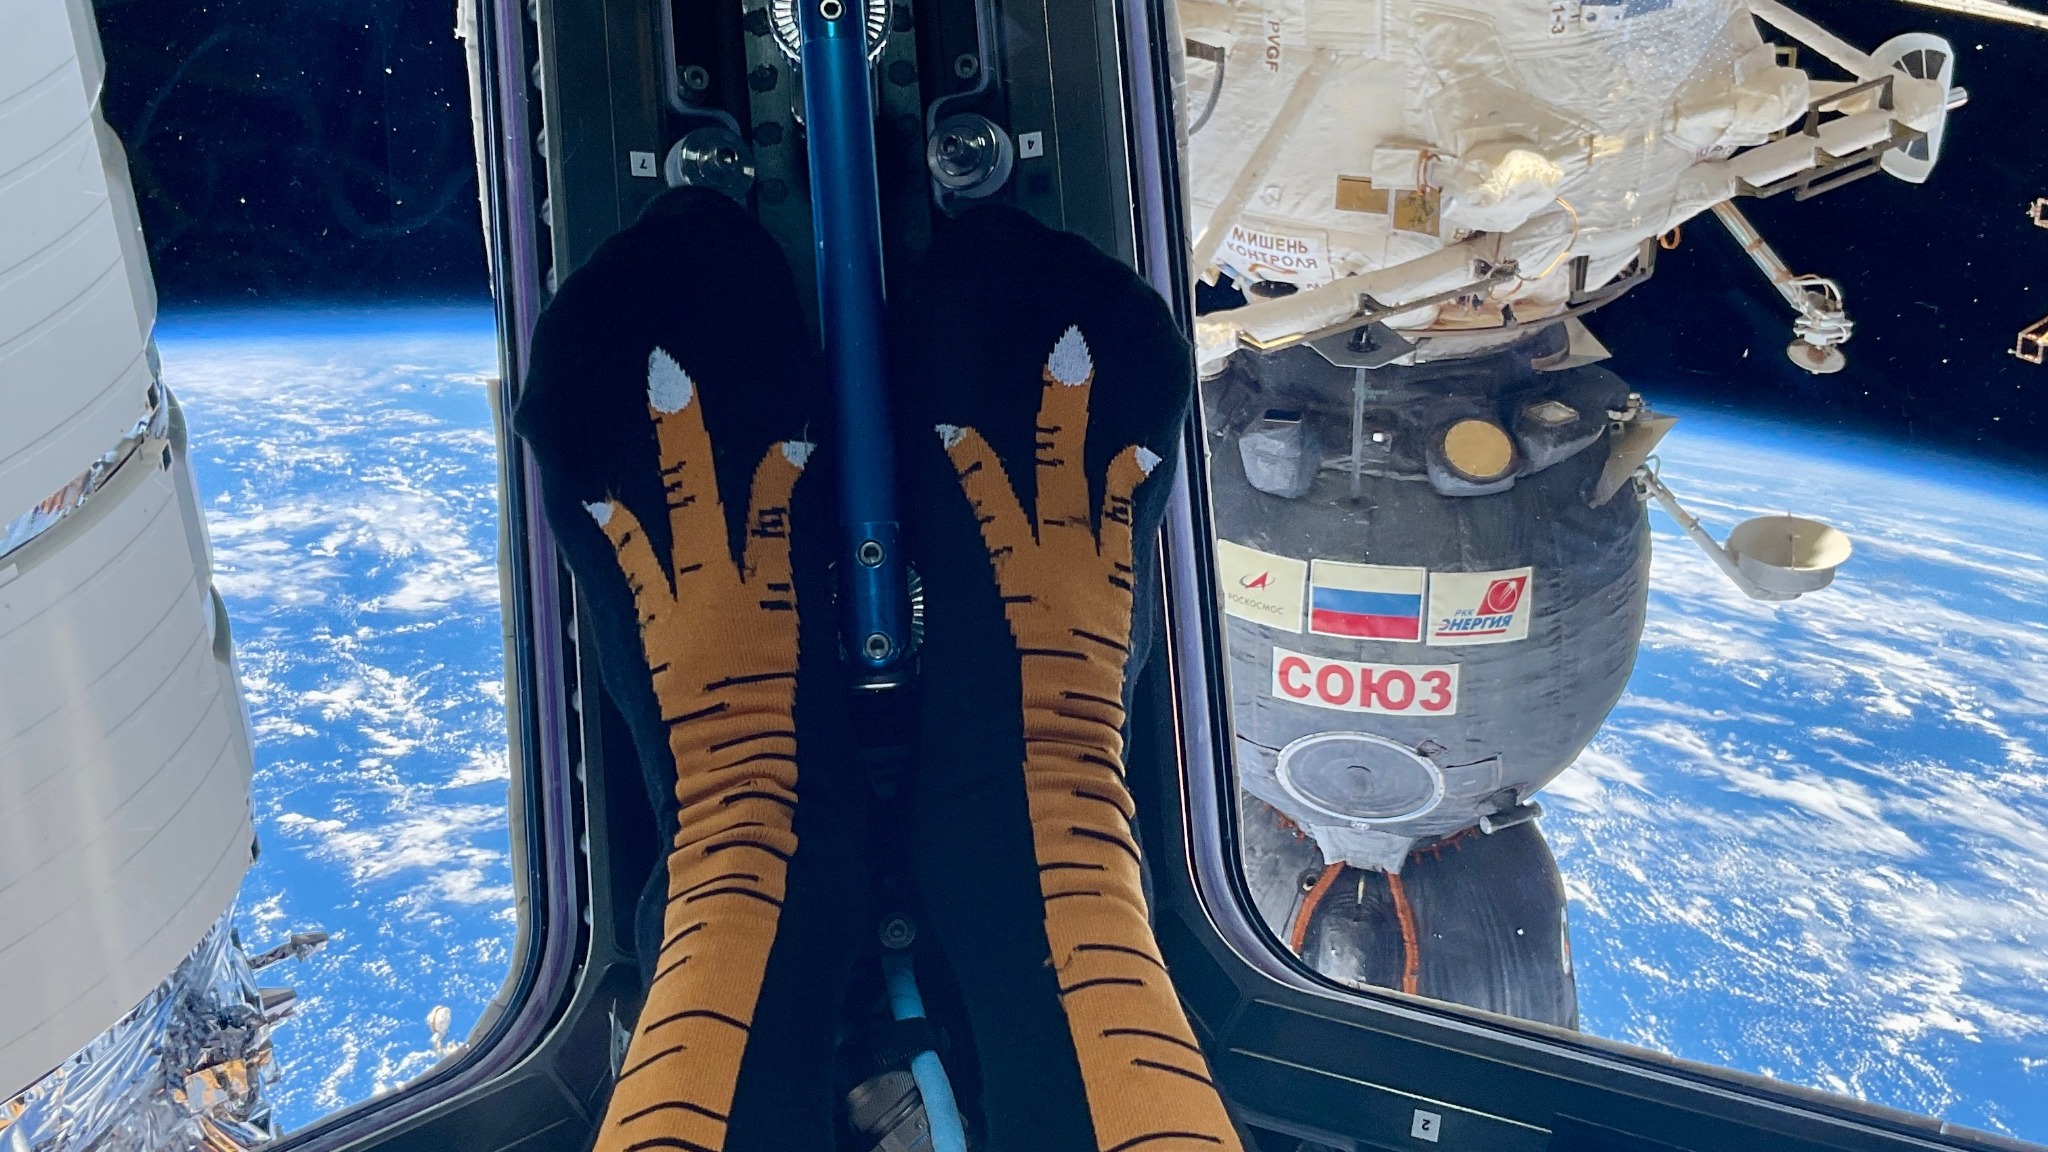 NASA astronaut celebrates Thanksgiving on ISS with turkey socks, Earth views Space